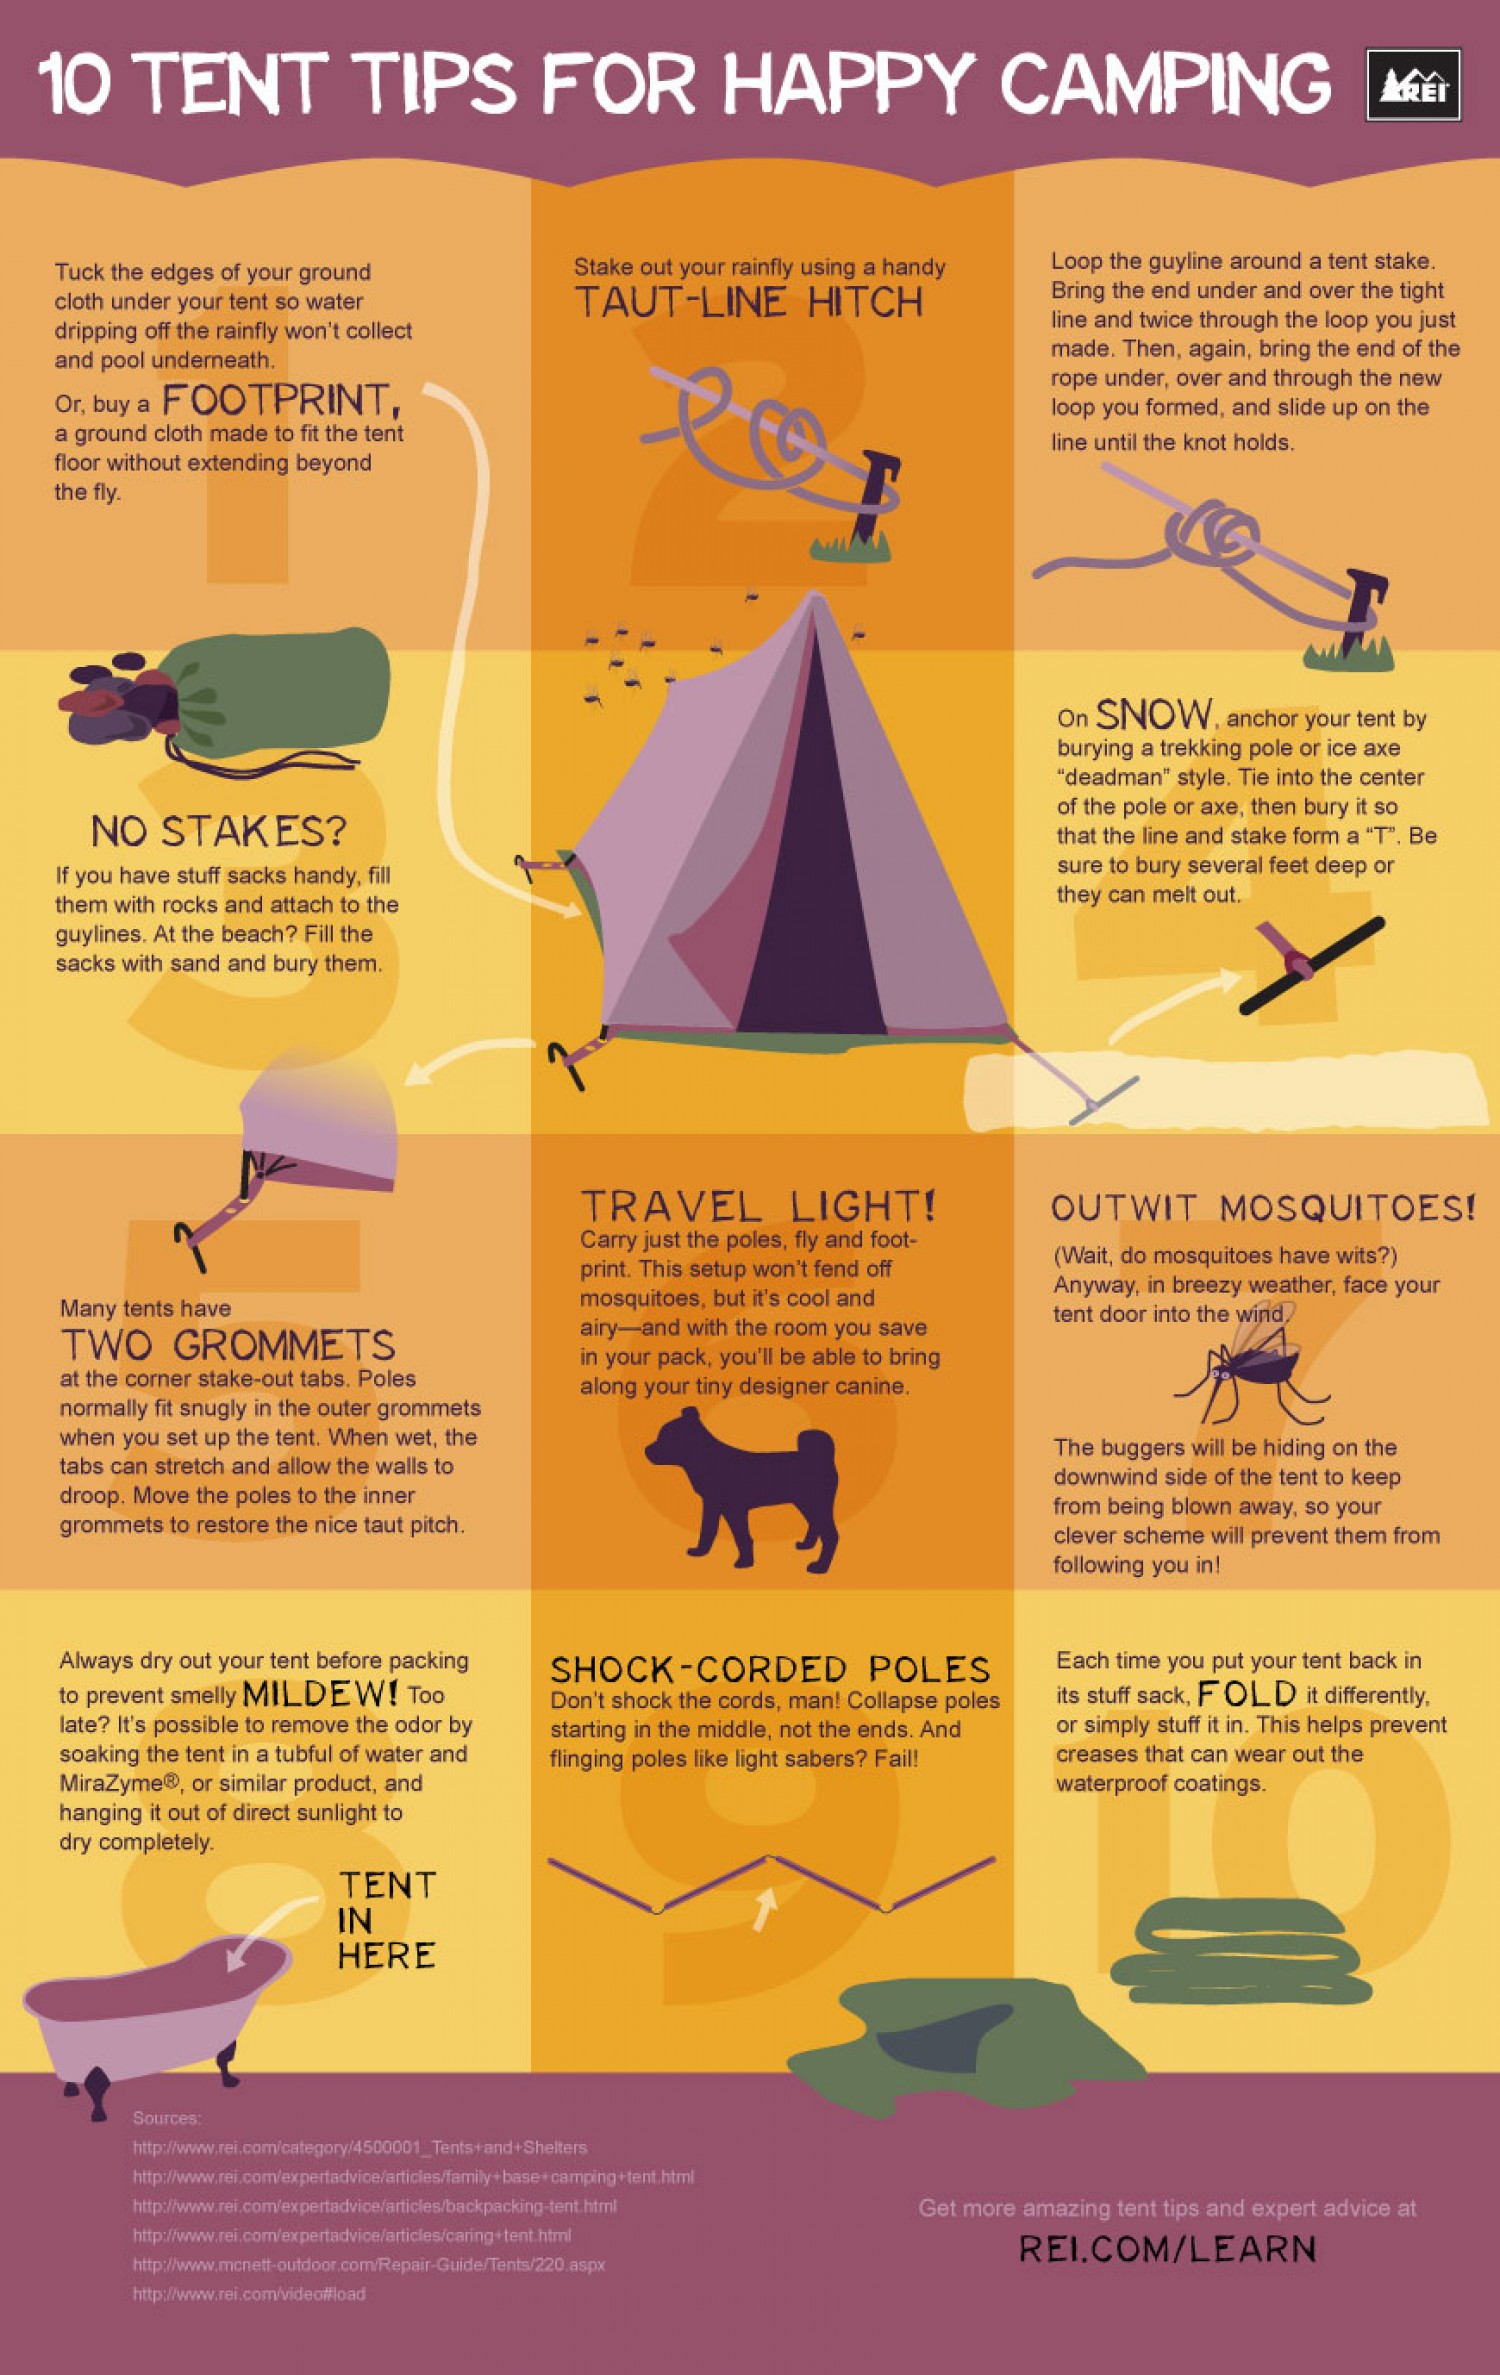 10 Tent Tips For Happy Campin